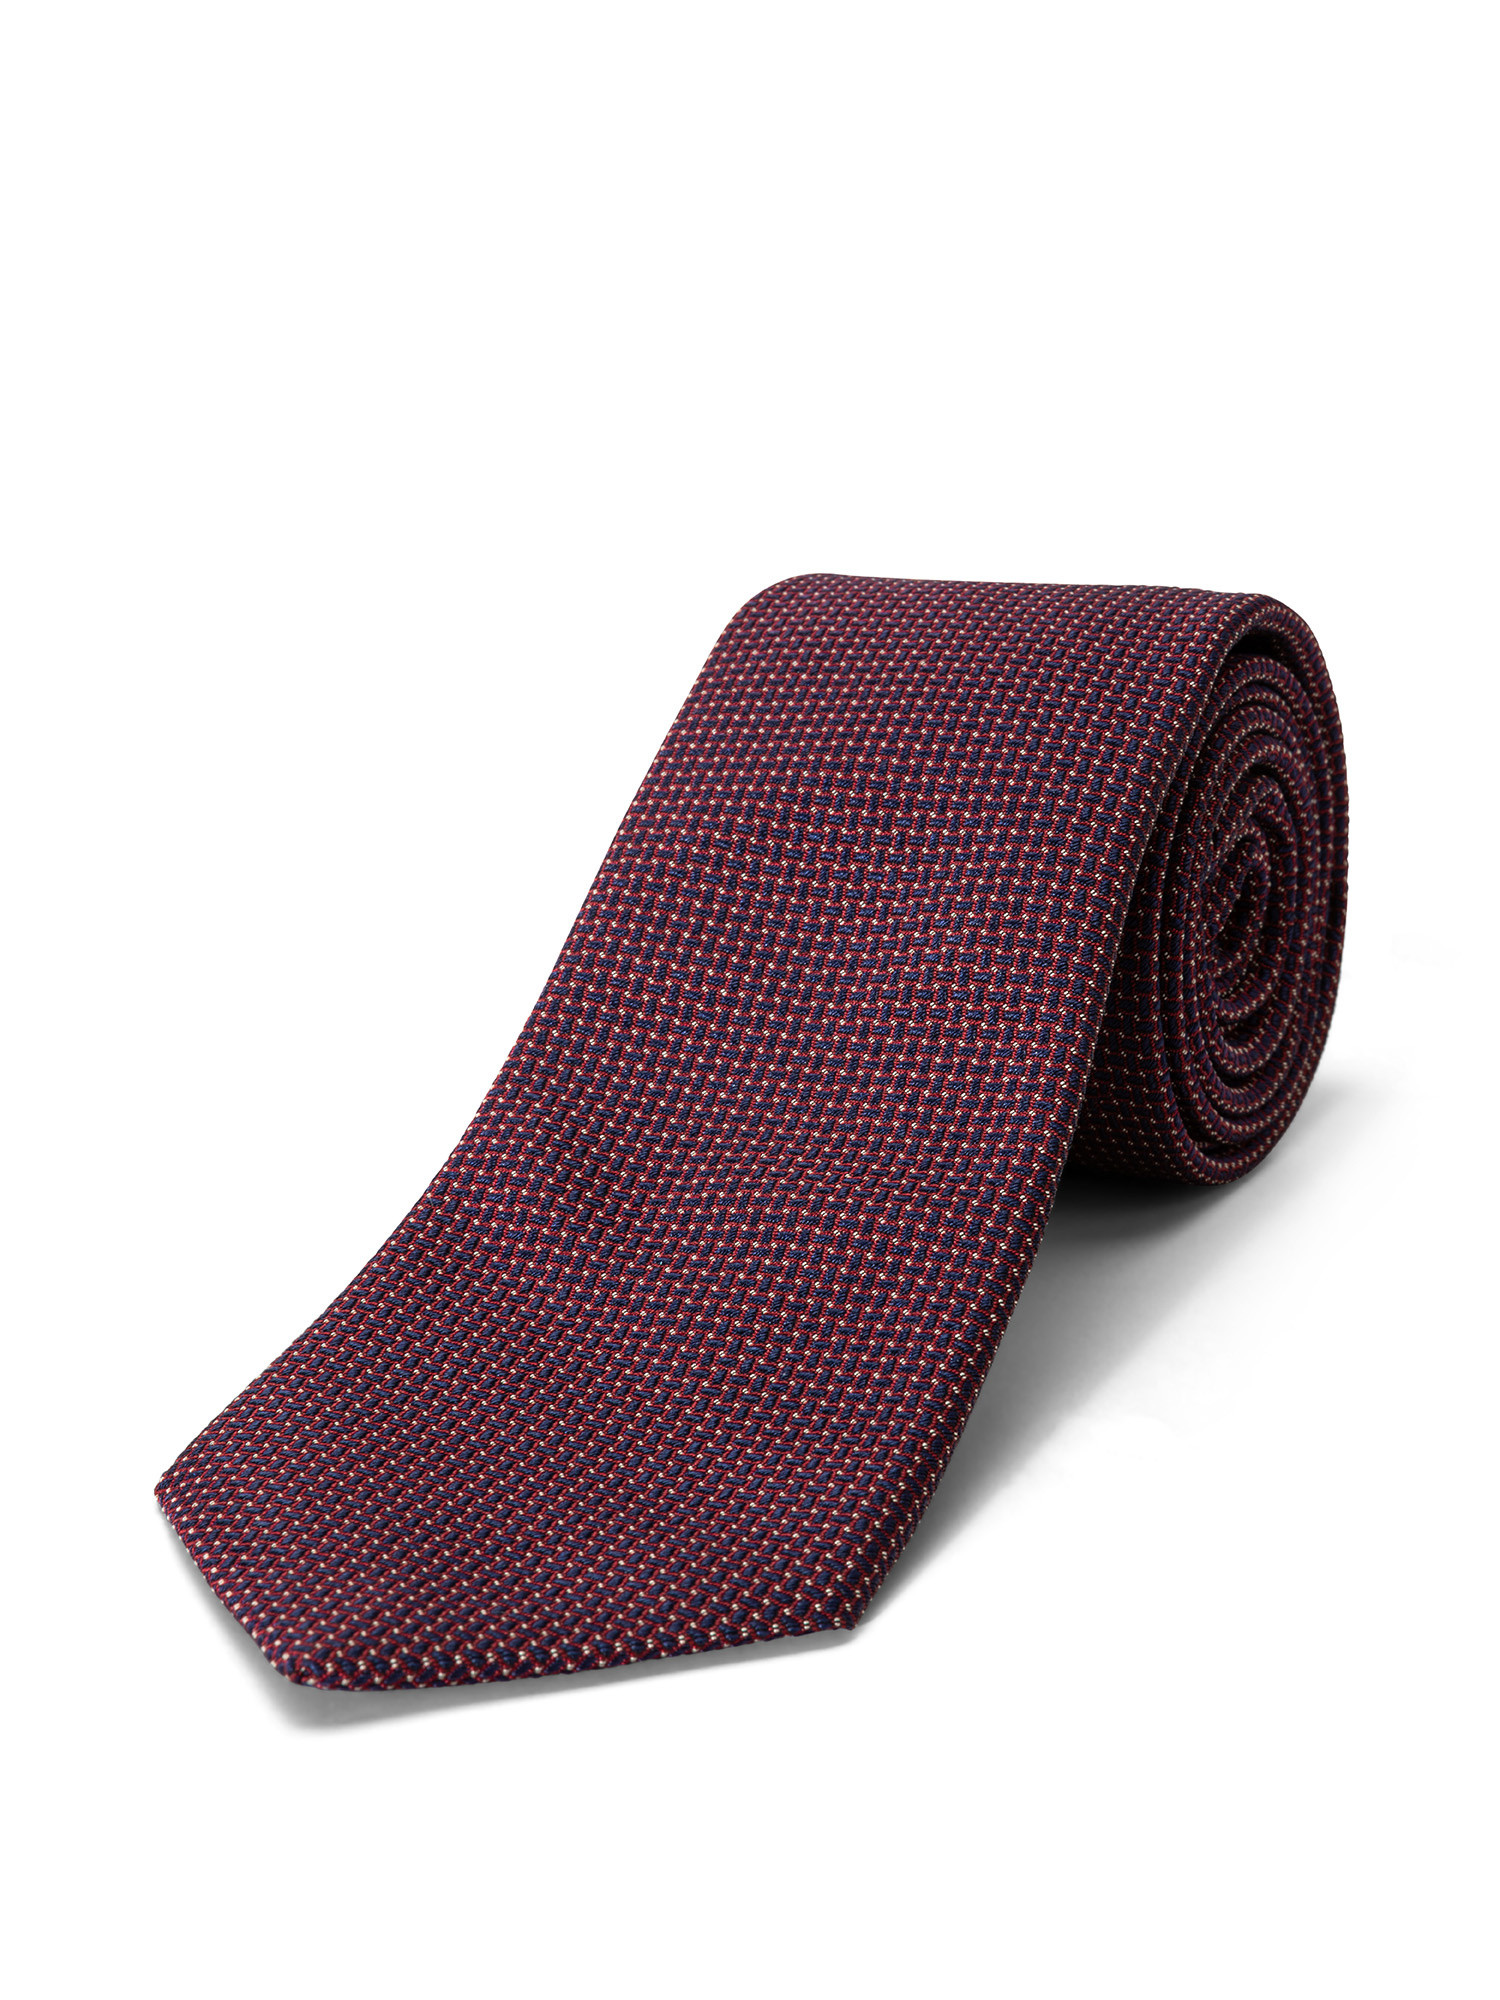 Luca D'Altieri - Patterned silk and cotton tie, Red Bordeaux, large image number 0